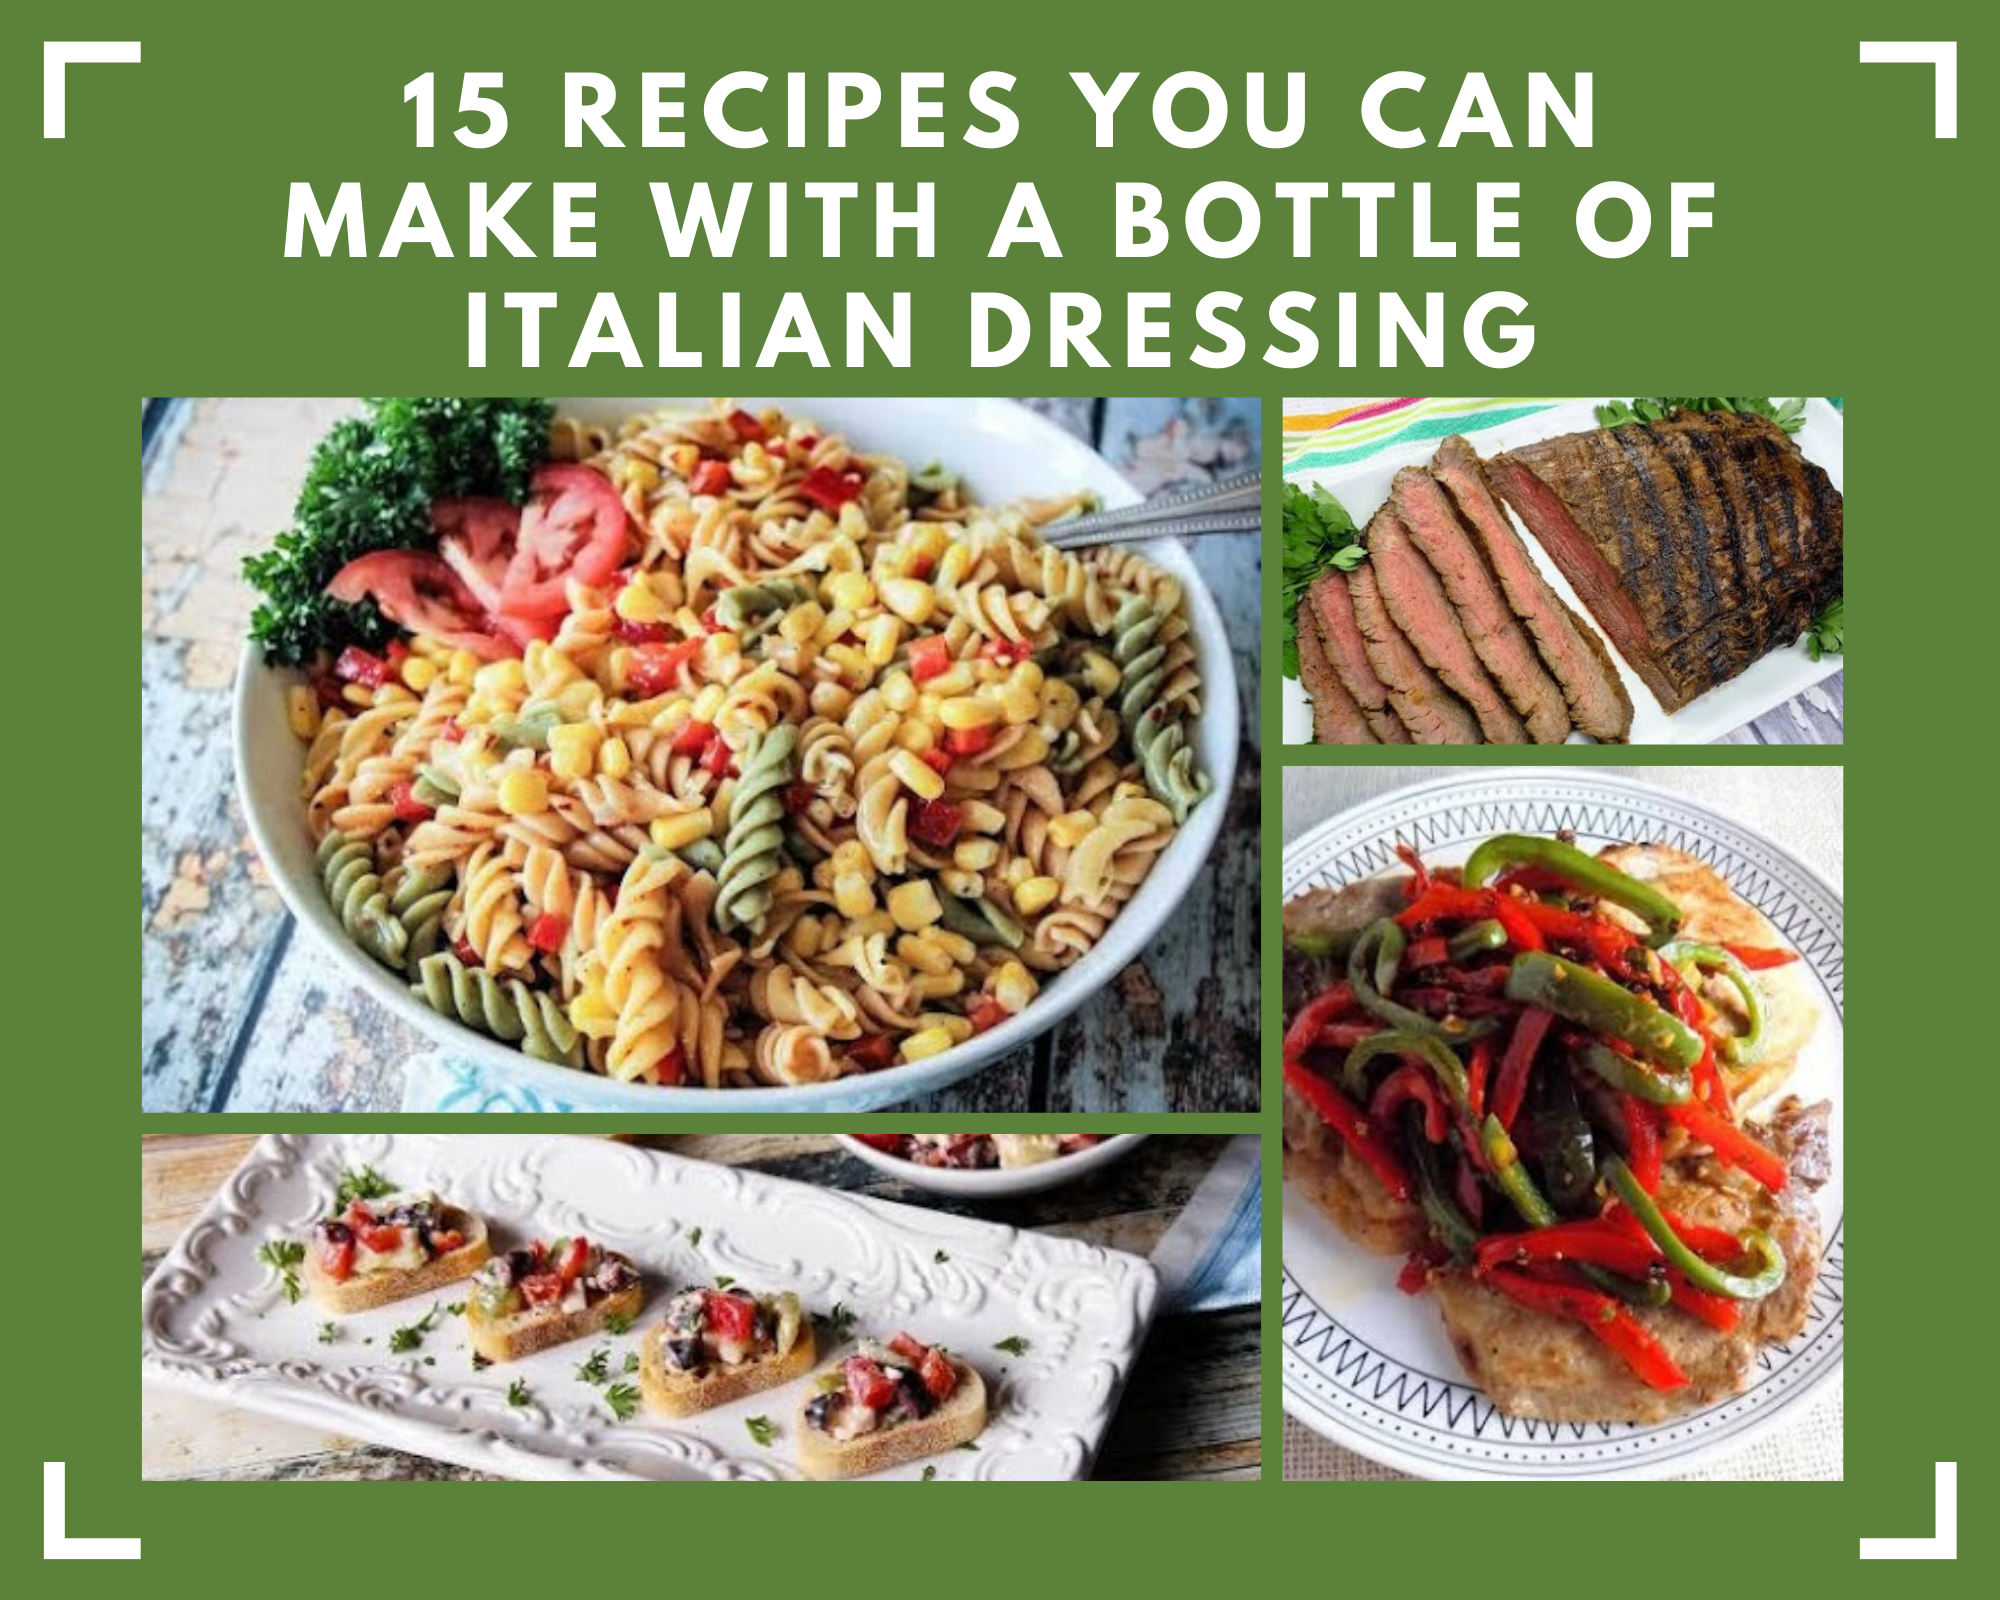 https://www.justapinch.com/blog/wp-content/uploads/2020/06/c2551360-15-recipes-you-can-make-with-a-bottle-of-italian-dressing.png